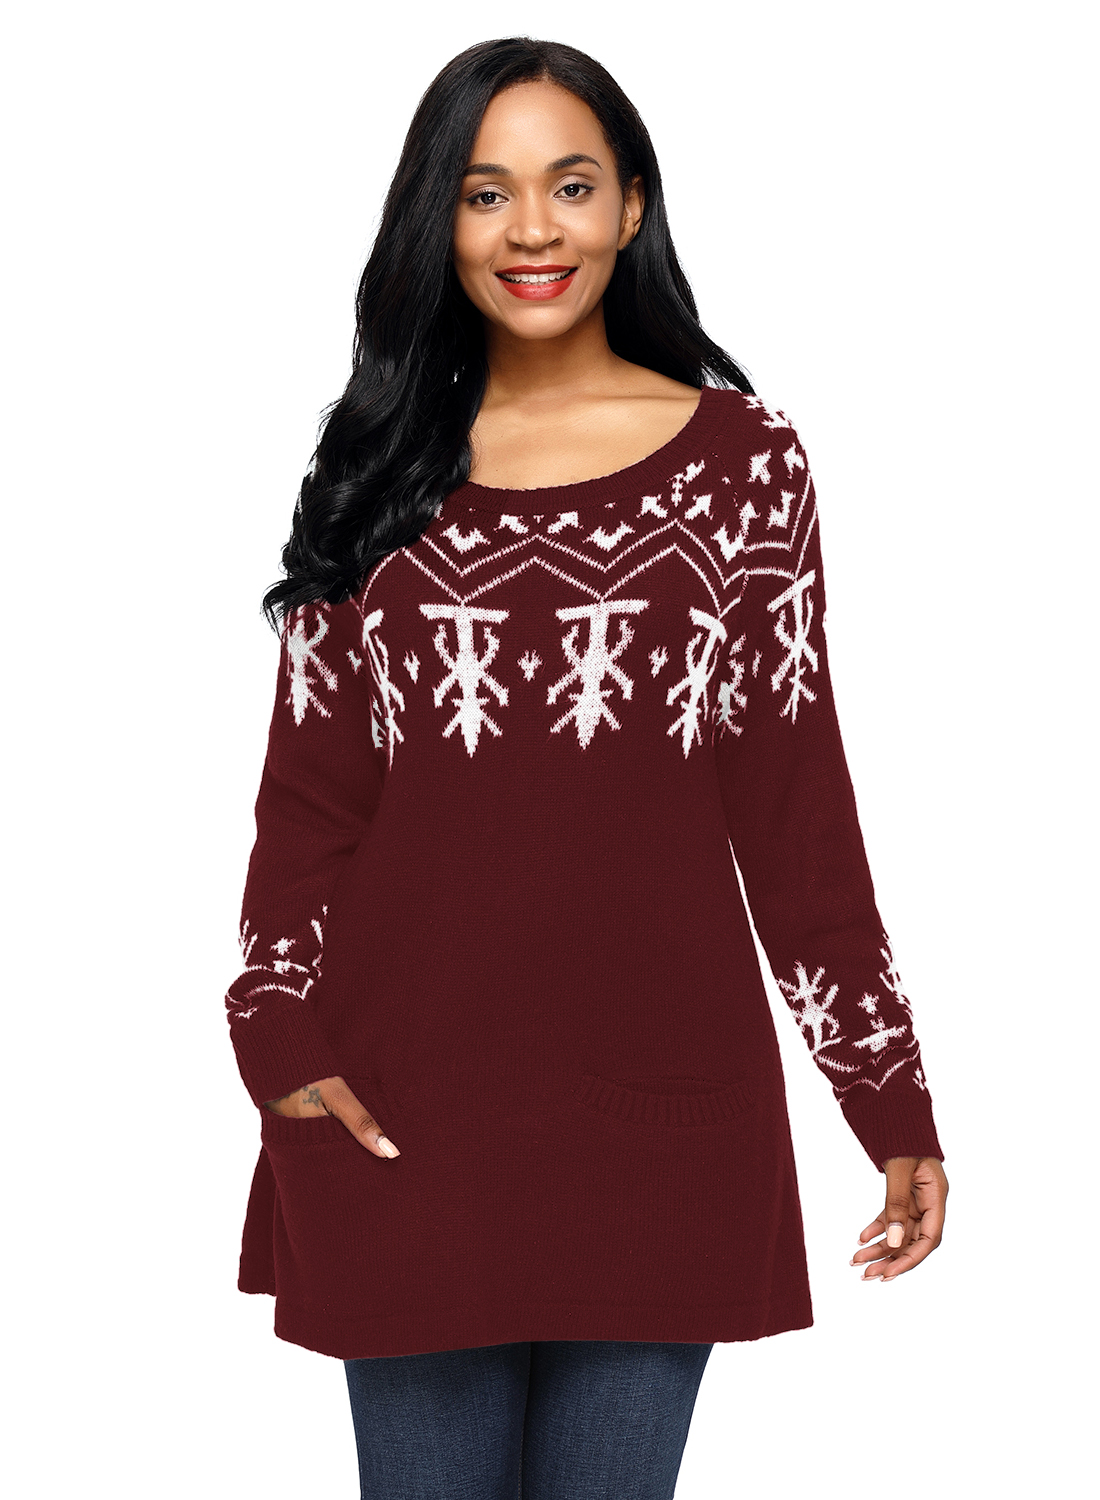 BY27720-3 Burgundy A-line Casual Fit Christmas Fashion Sweater